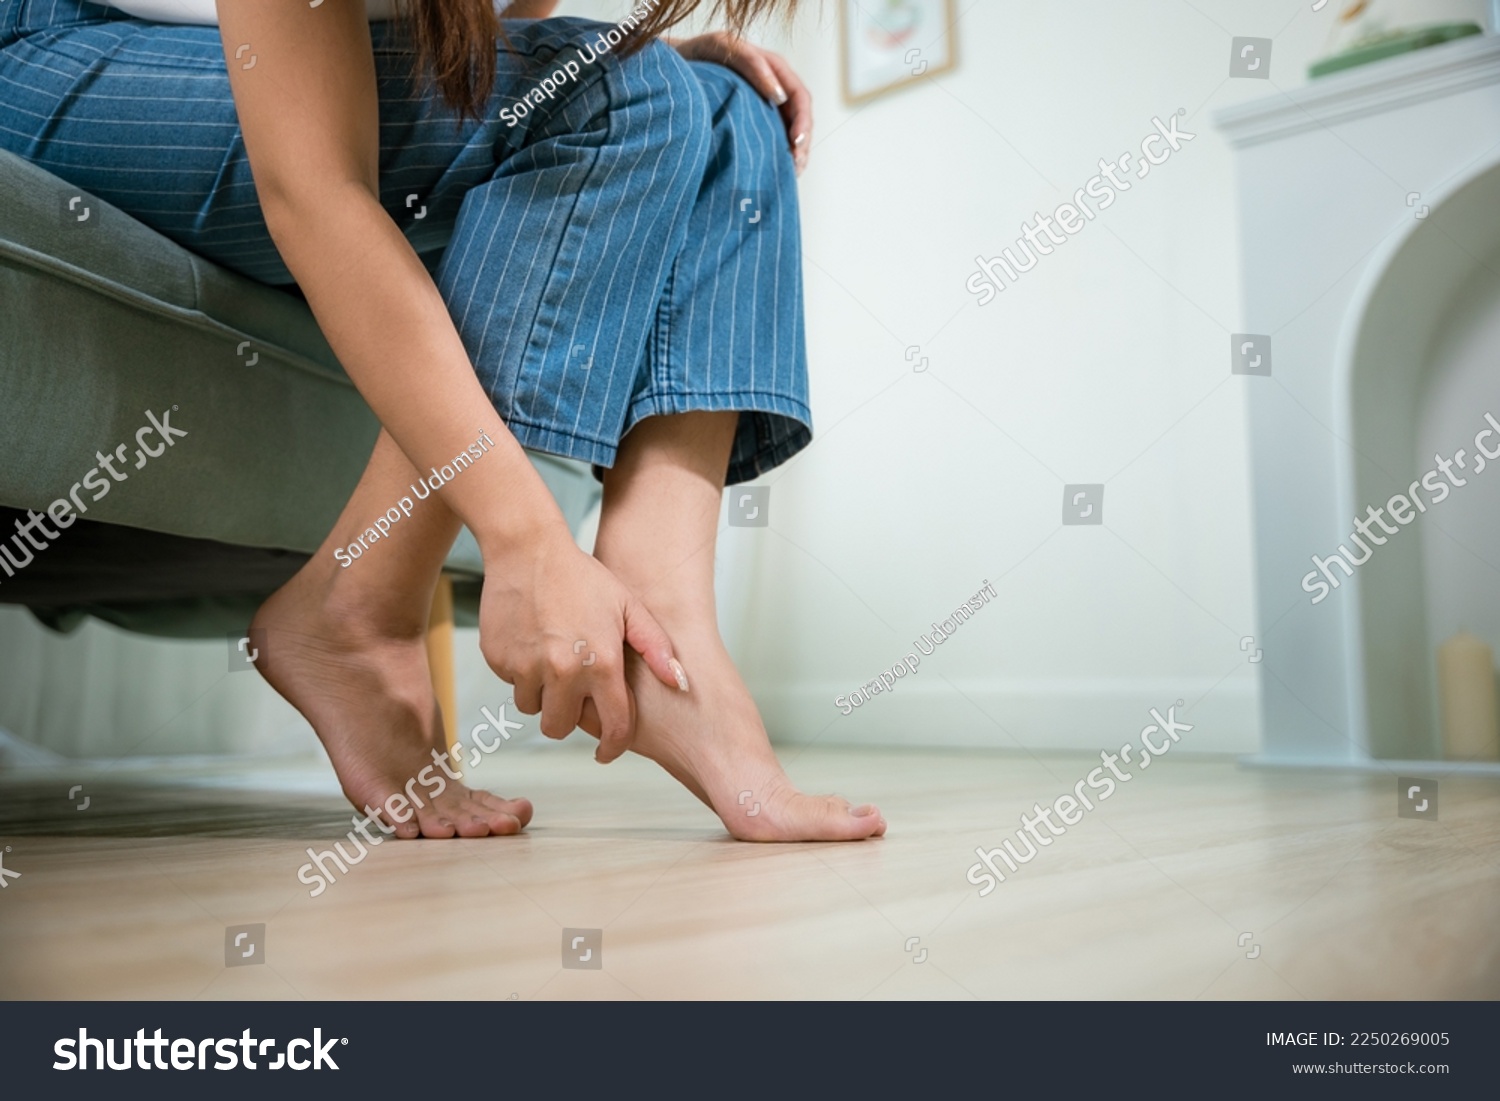 Asian young woman sitting on sofa holding her feet and stretch muscles have symptoms feeling pain, beautiful female problems with foot at home, painful ankle injury, Health care and medical concept #2250269005